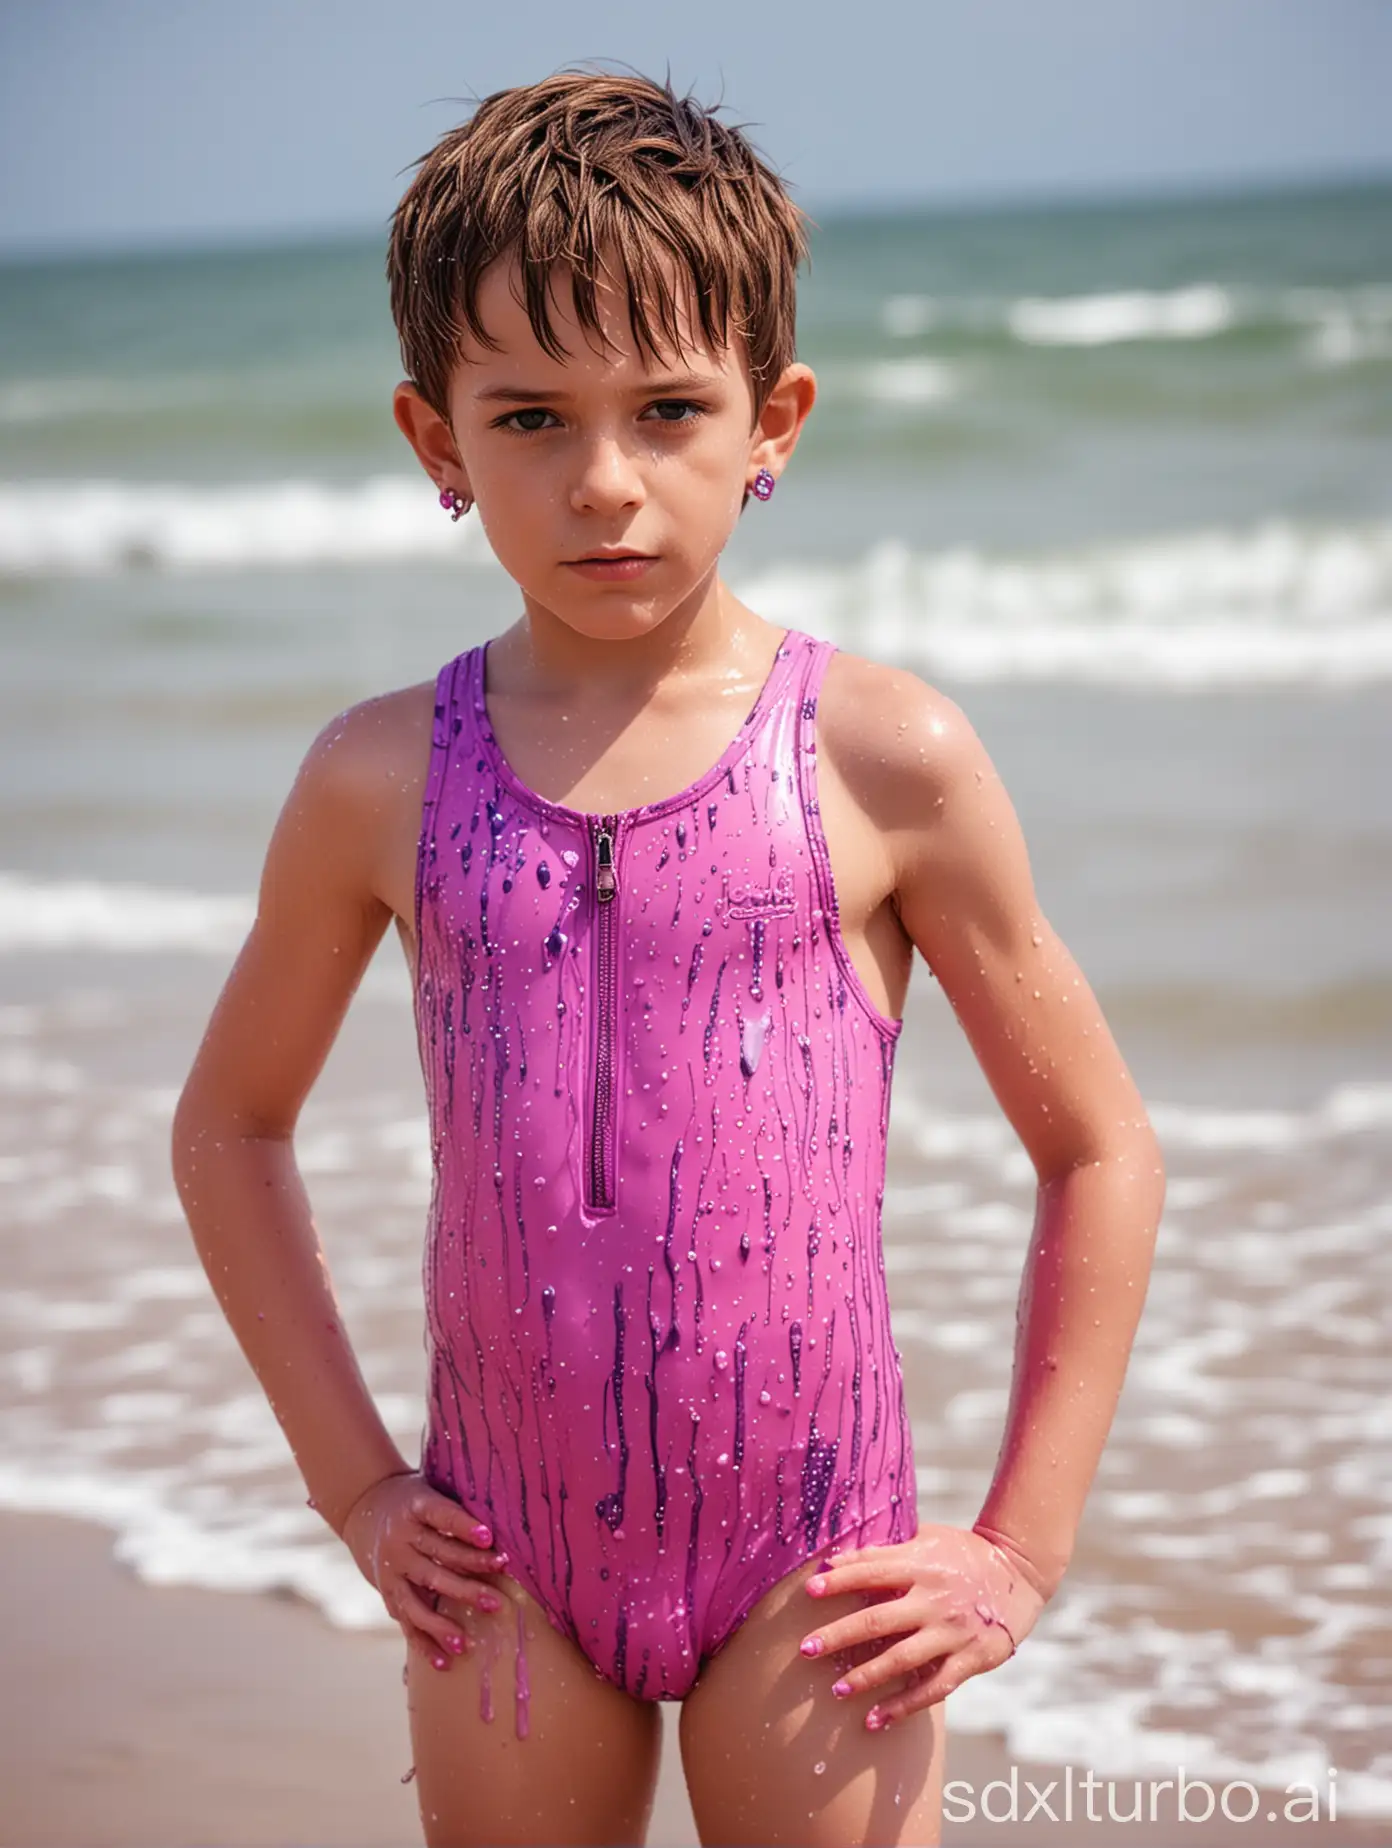 A handsome 8 year old boy iis wearing a tight pink and purple wet one piece swimsuit at the beach not looking amused. He is also wearing pink earrings and his fingernails are painted pink.